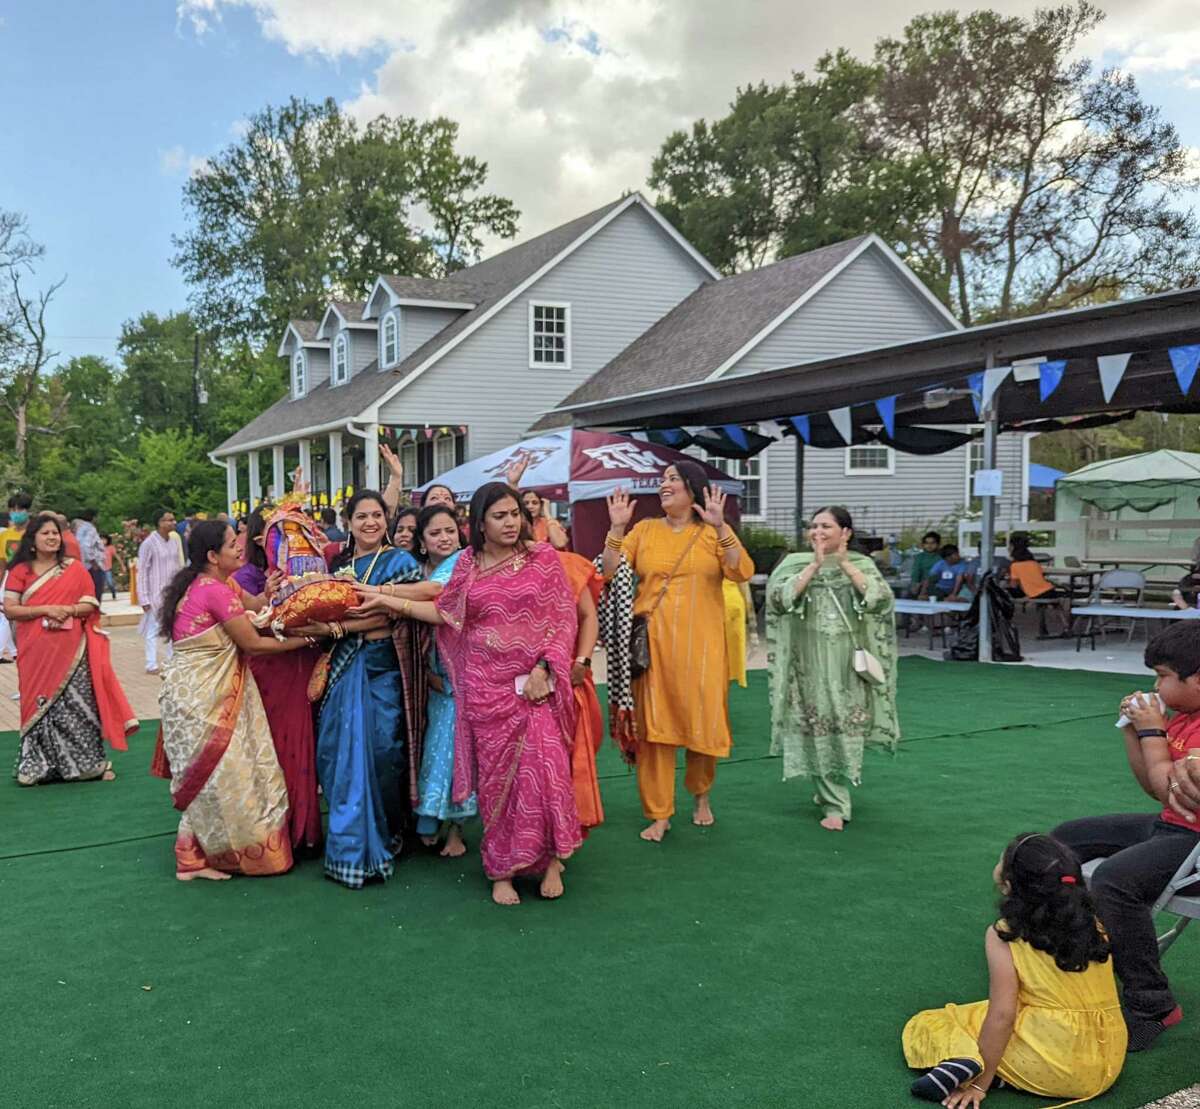 Members of Fort Bend County’s Indian community assembled at nonprofit Universal Shraddha Foundation’s Rosenberg campus for the chariot festival or “ratha yatra.”